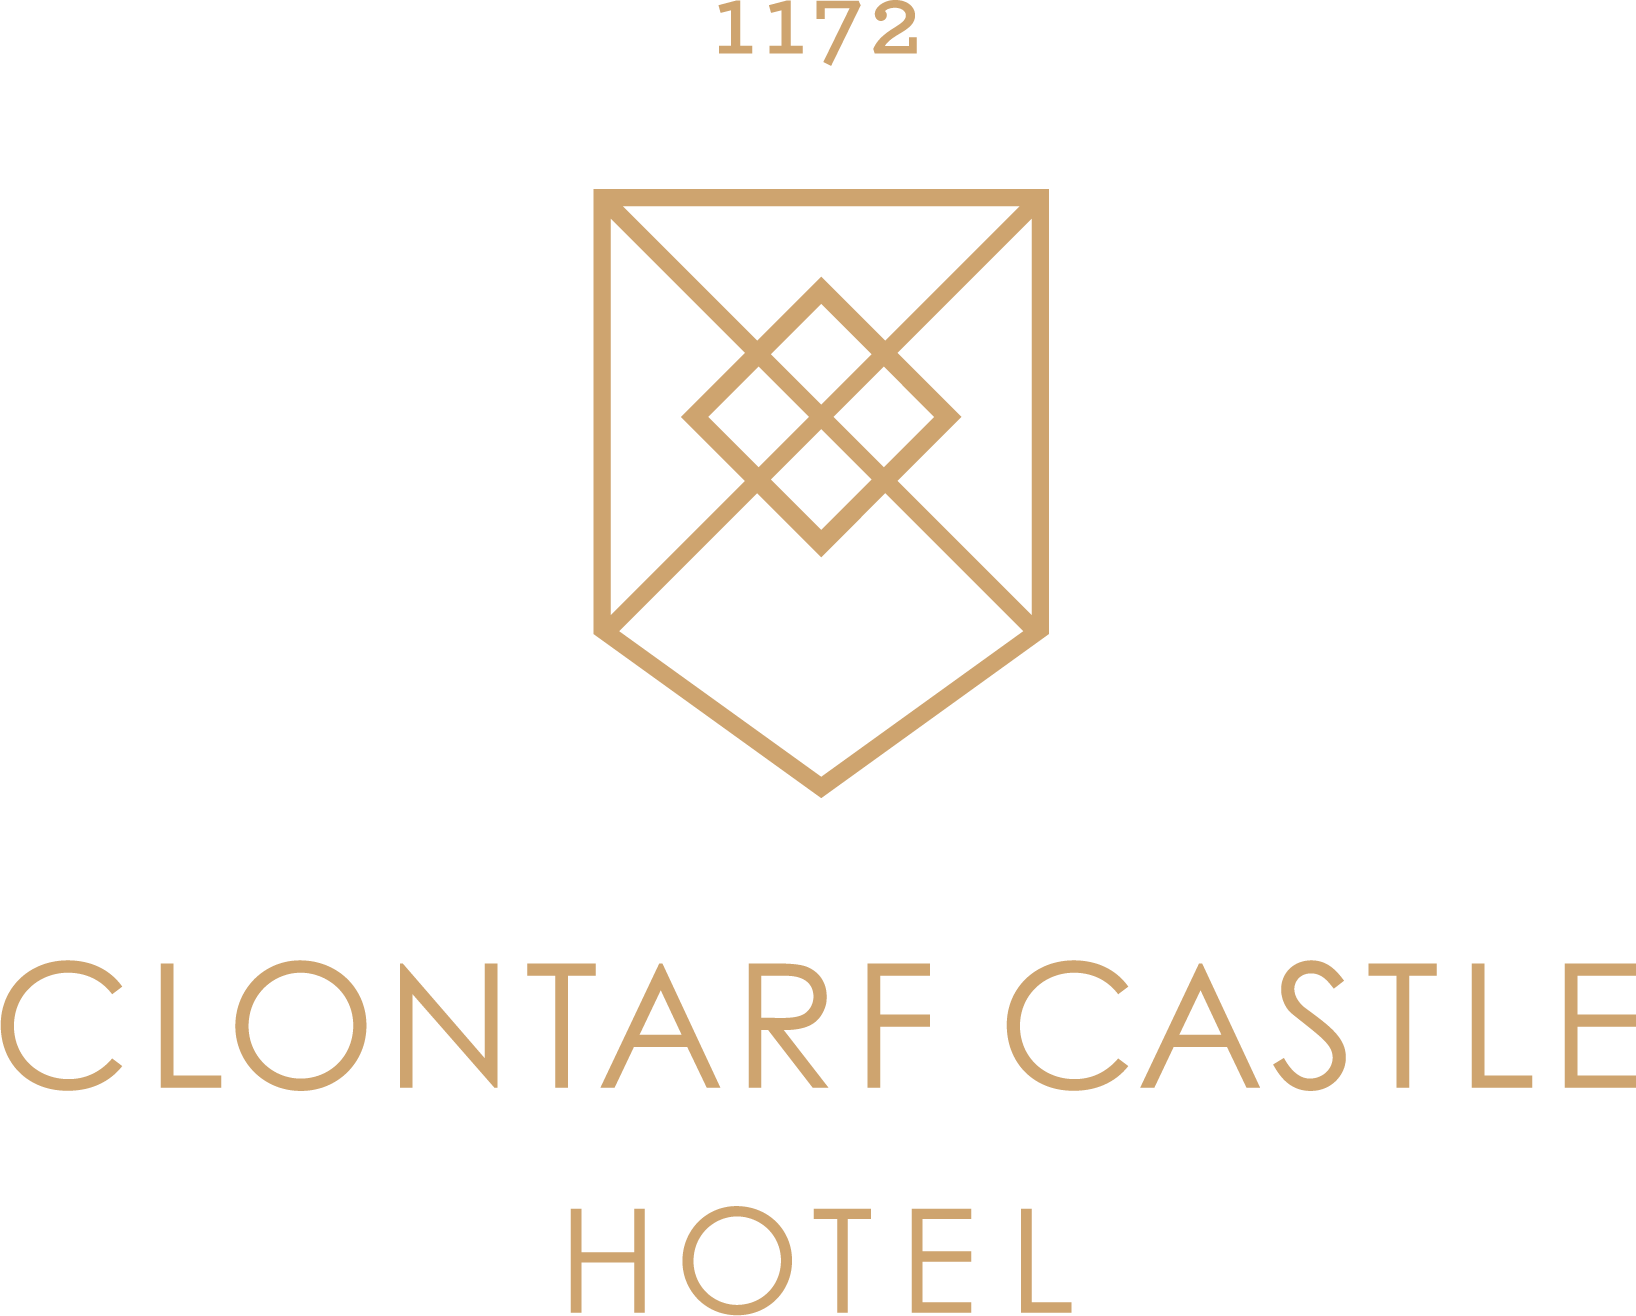 The verticle Clontarf Castle logo, the medieval flag emblem is stacked onto of the gold wording, Clontarf Castle Hotel. 1172 is stacked to the top of the logo. This is the year the castle was built.